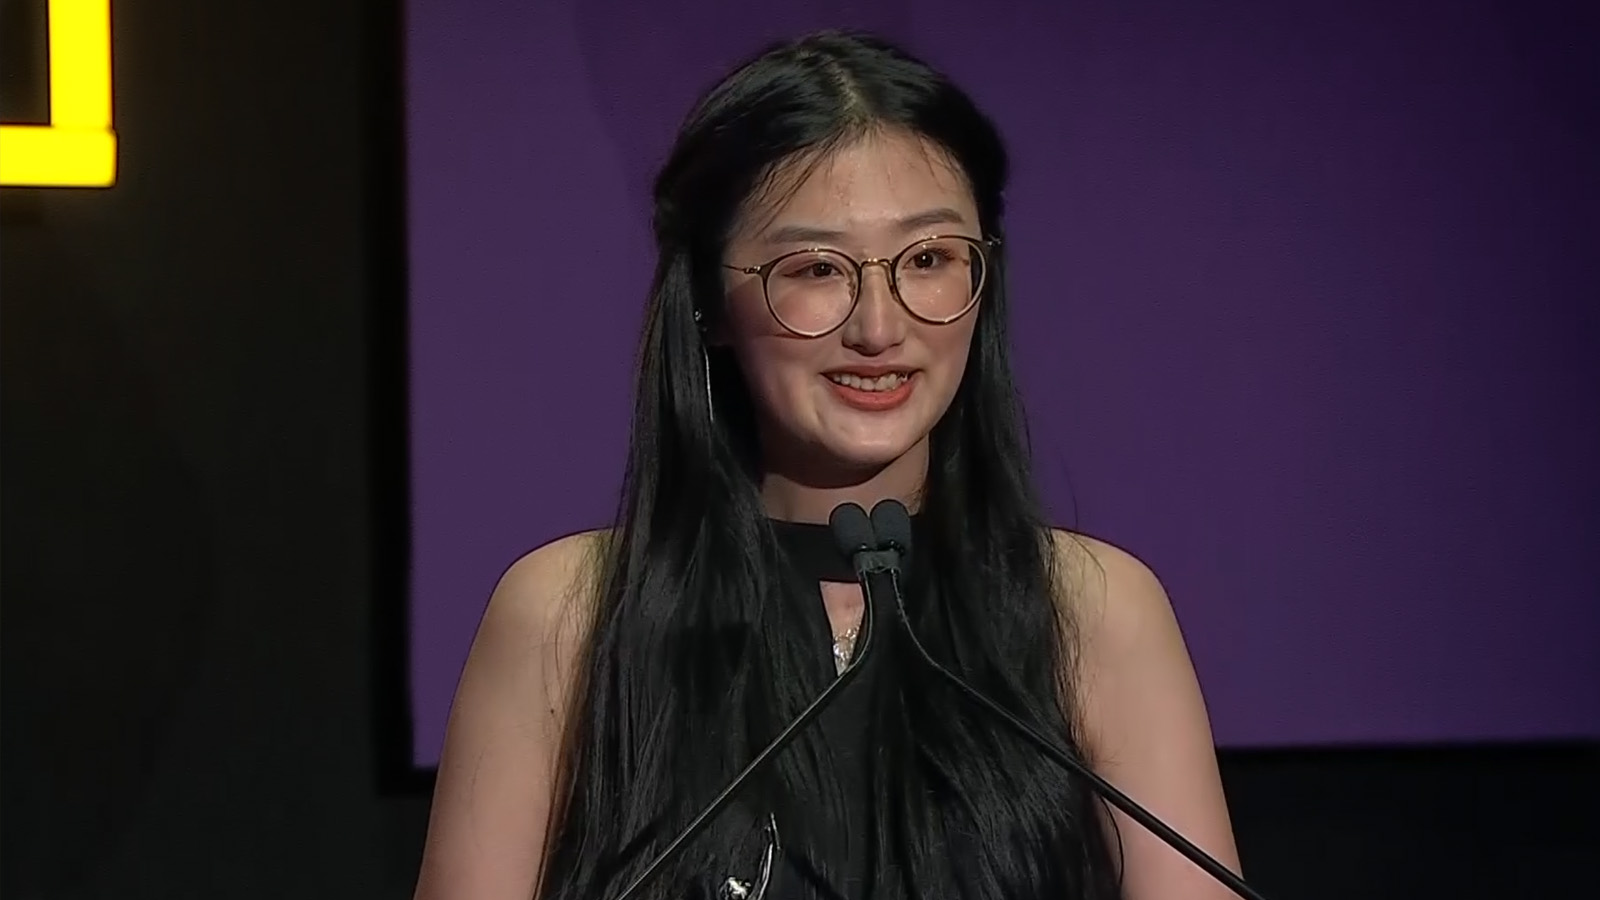 Guanqin Lin accepts the Anne V Coates Student Award. Courtesy Getty Images